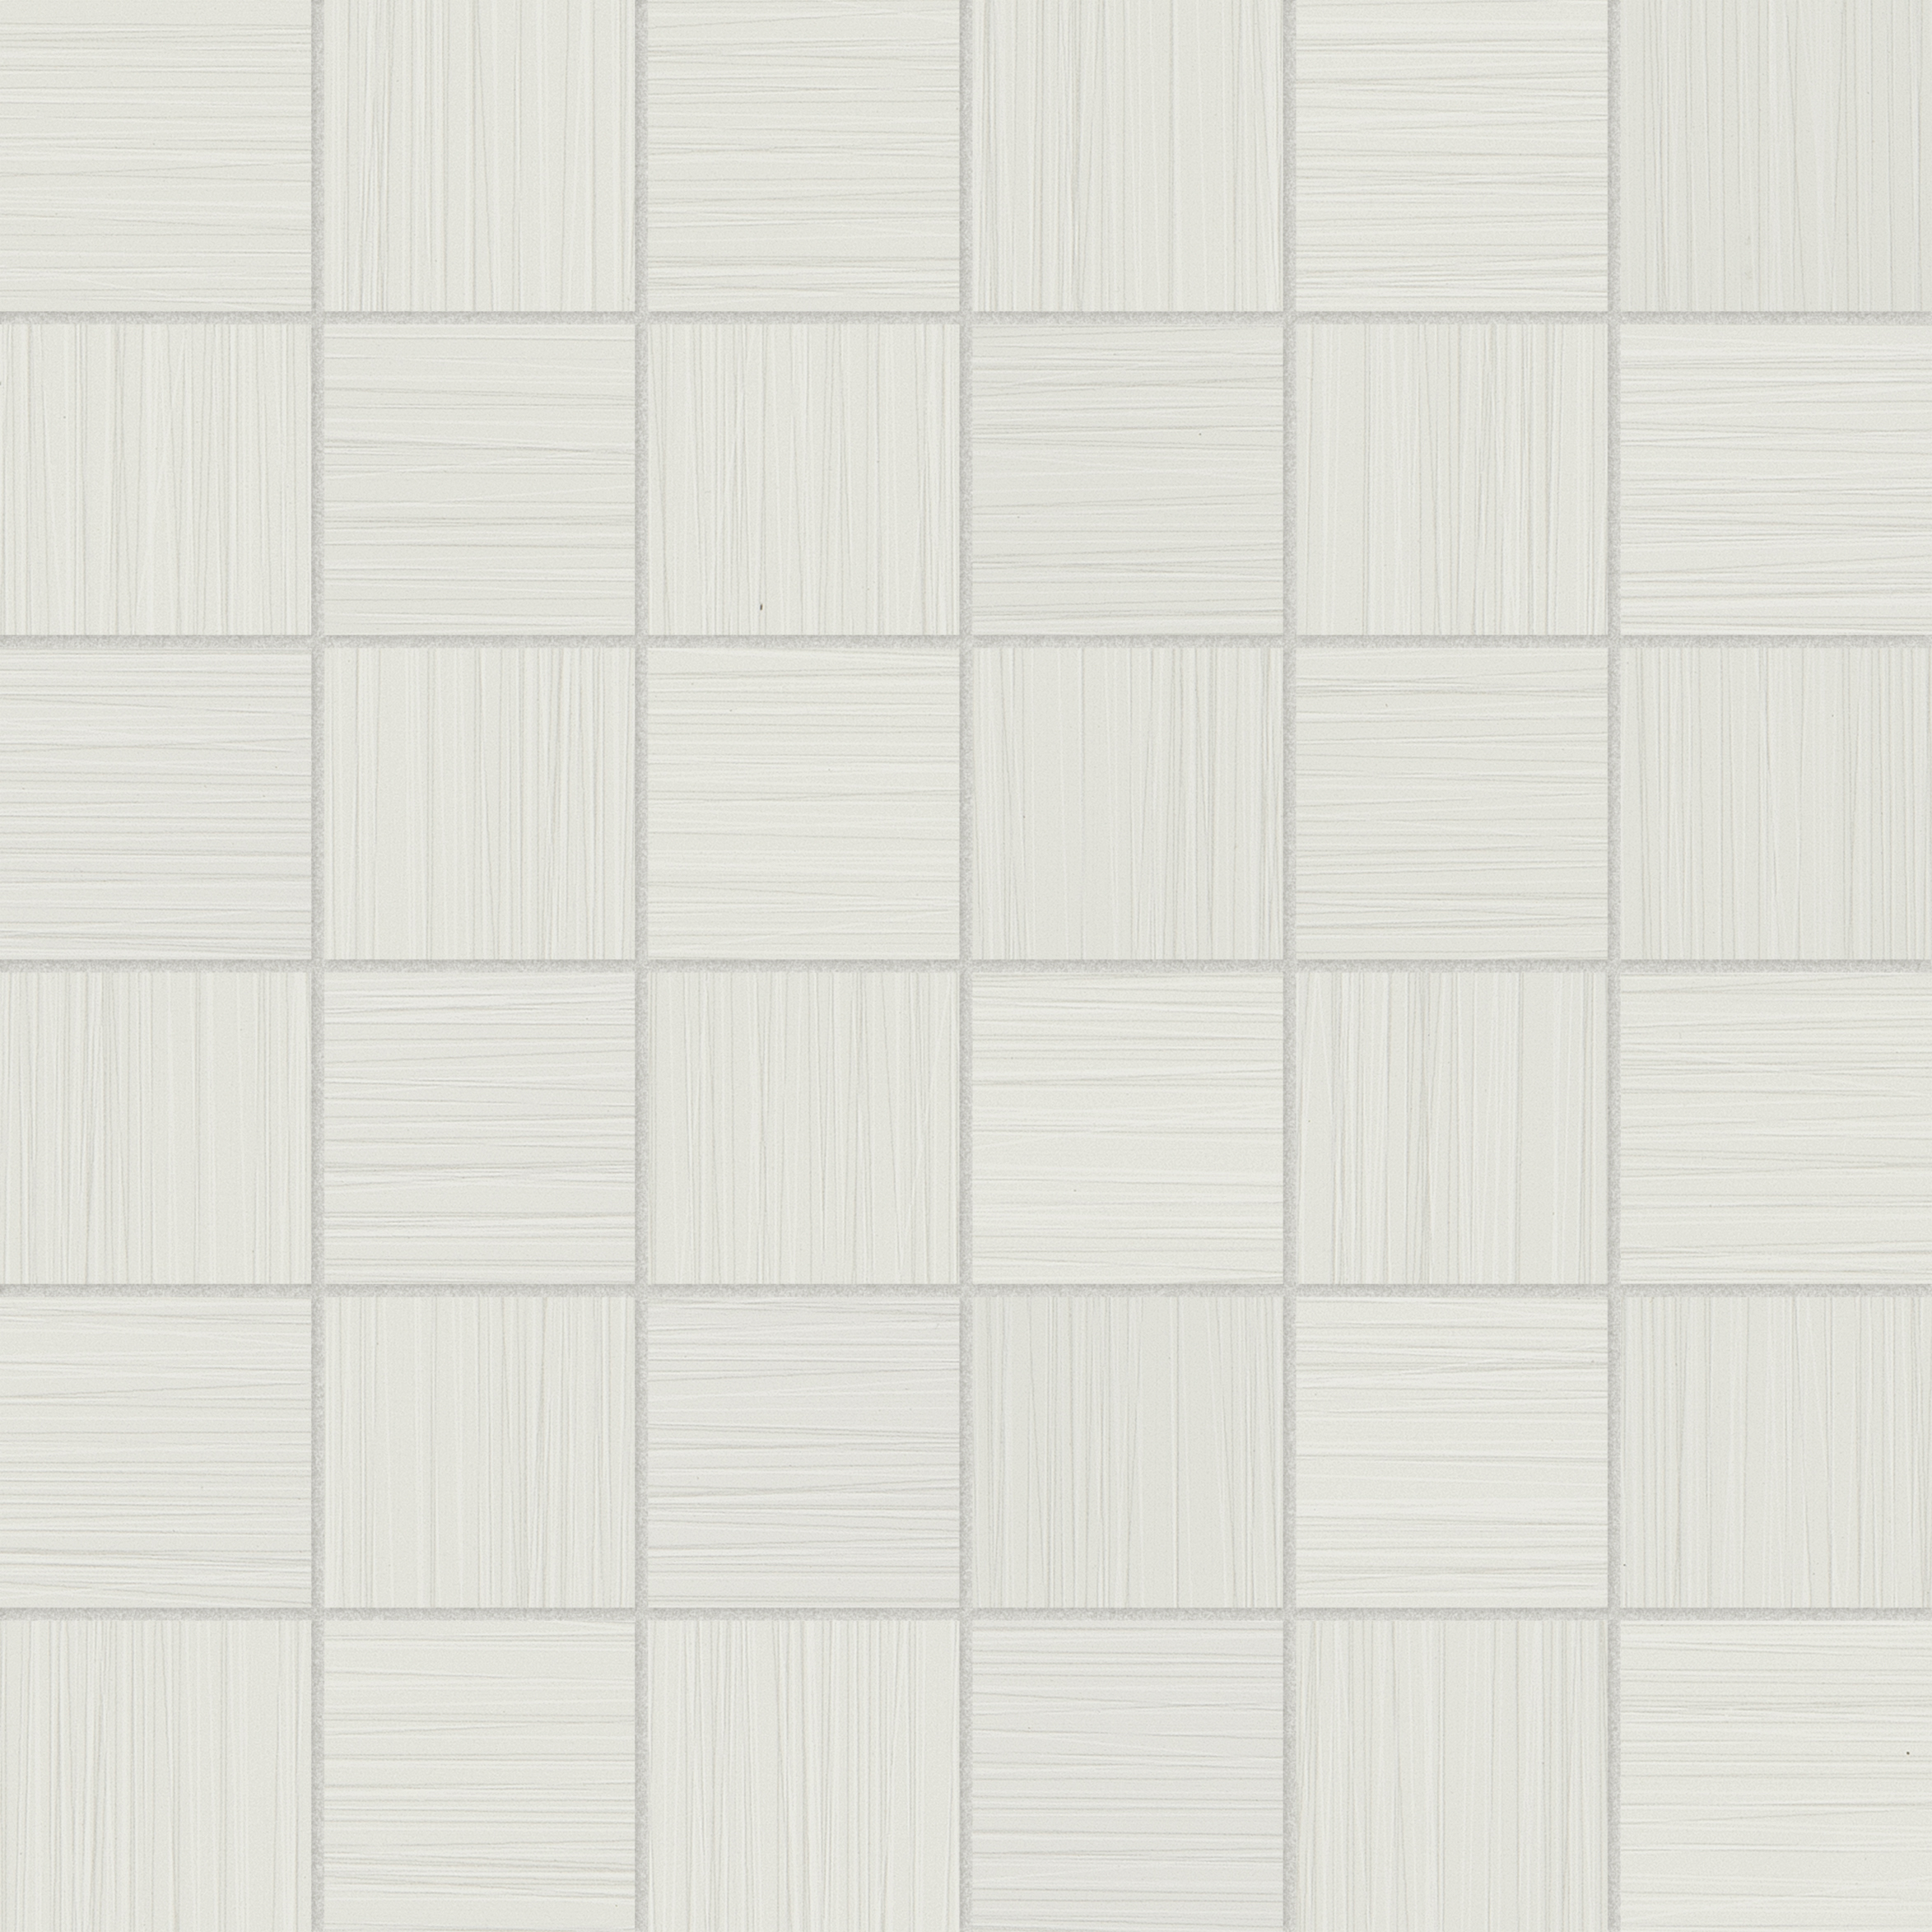 bianco straight stack 2x2-inch pattern color body porcelain mosaic from zera annex anatolia collection distributed by surface group international matte finish straight edge edge mesh shape